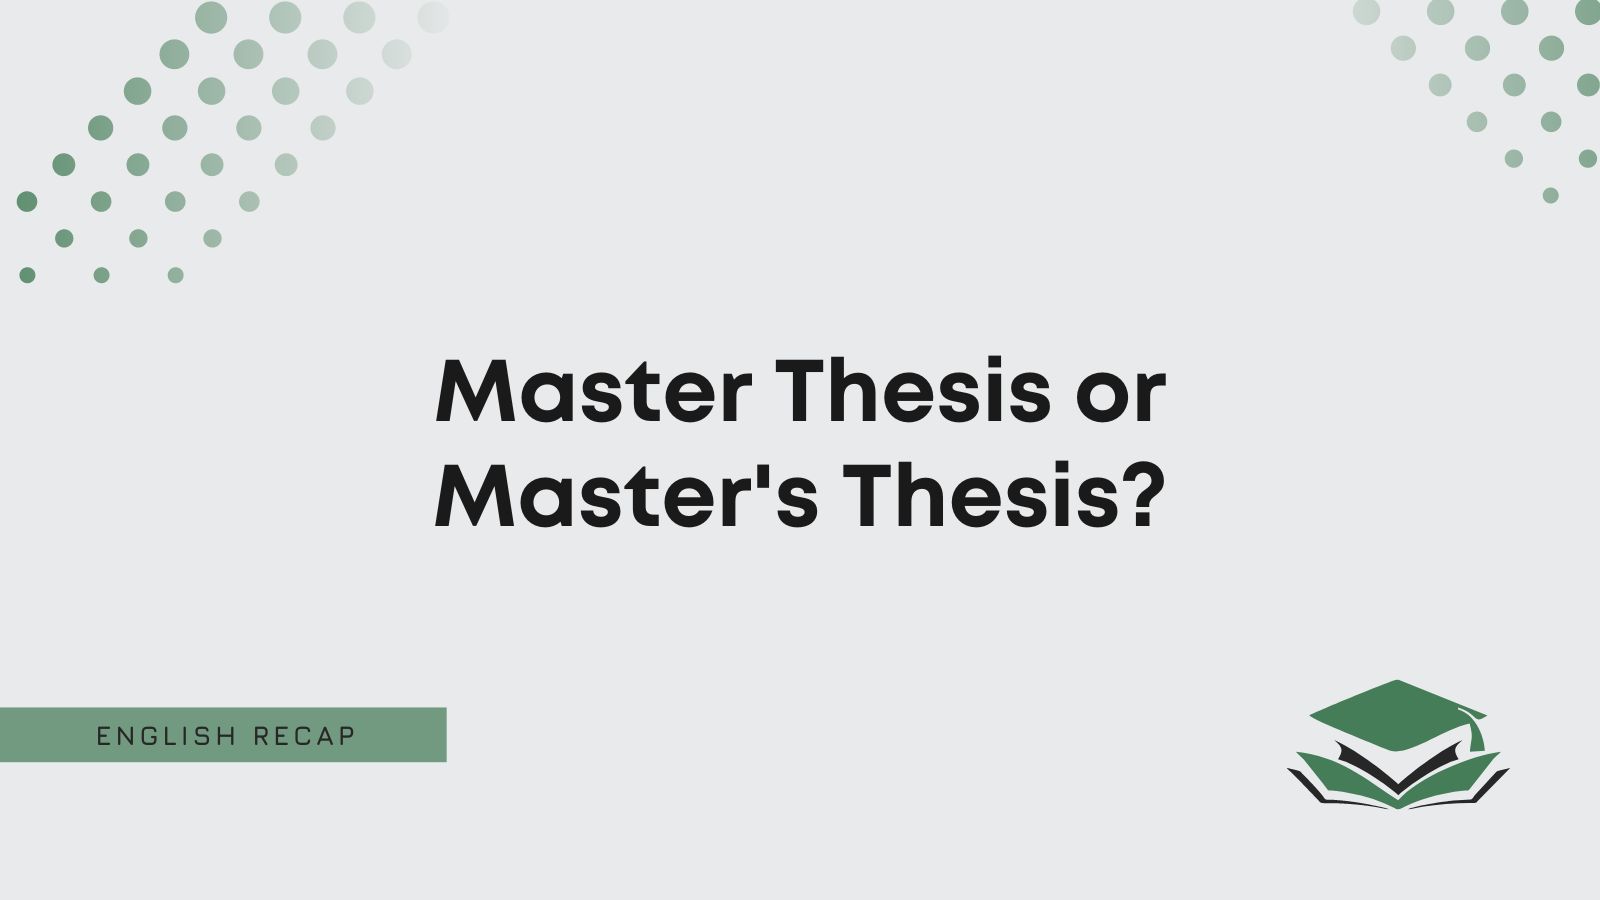 plural masters thesis